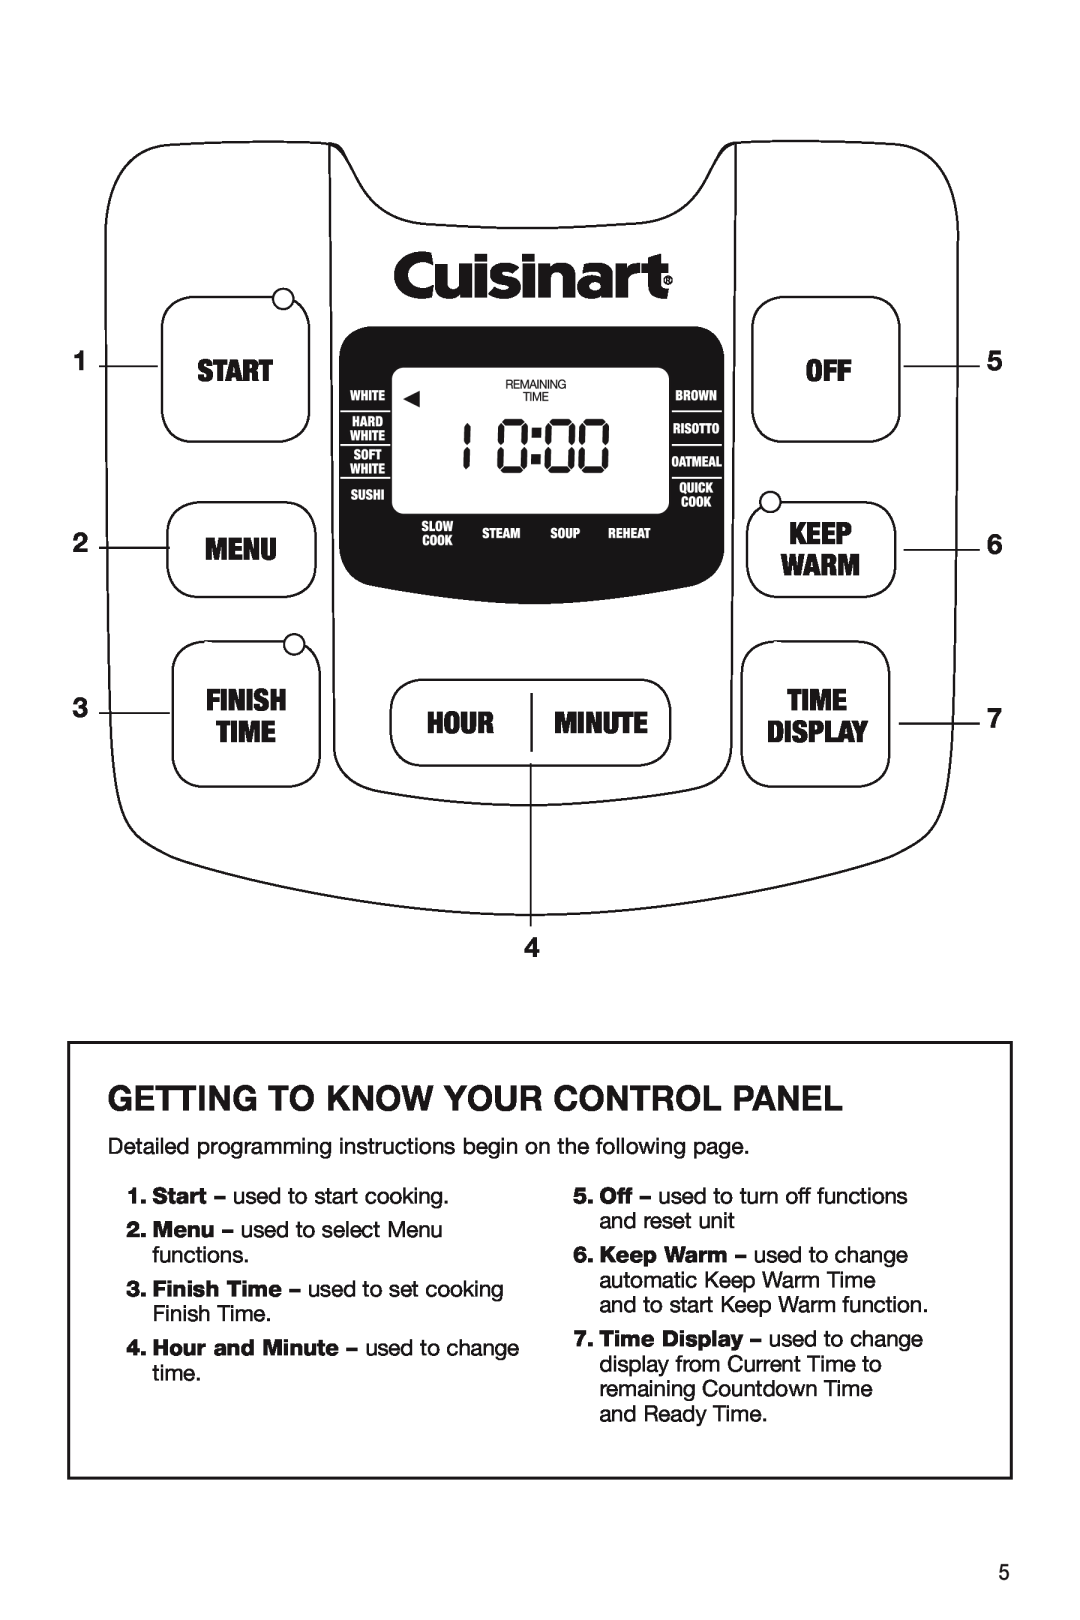 Cuisinart FRC-800 manual Getting To Know Your Control Panel, Hour and Minute - used to change time 